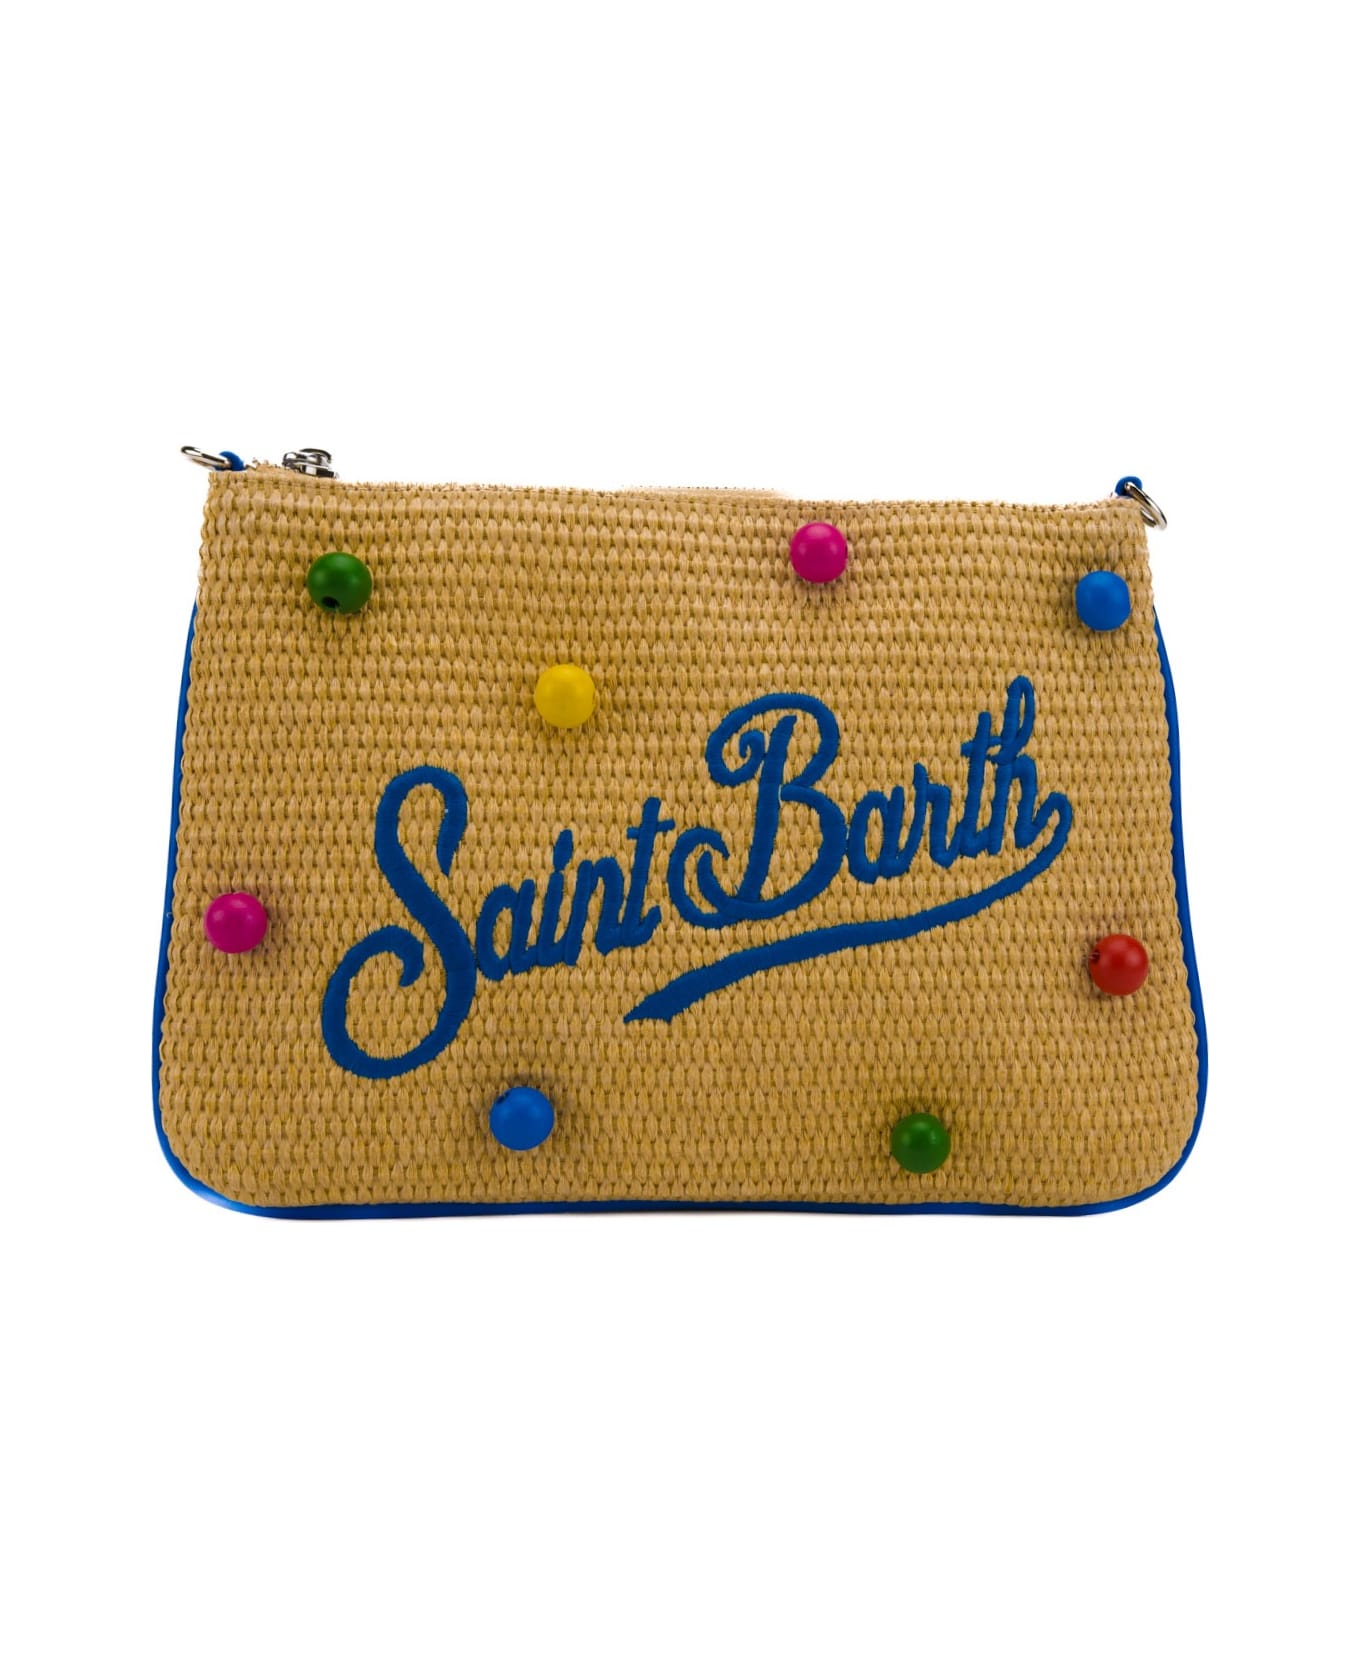 MC2 Saint Barth Parisienne Bag In Raffia With Wooden Beads - Naturale/multicolor クラッチバッグ